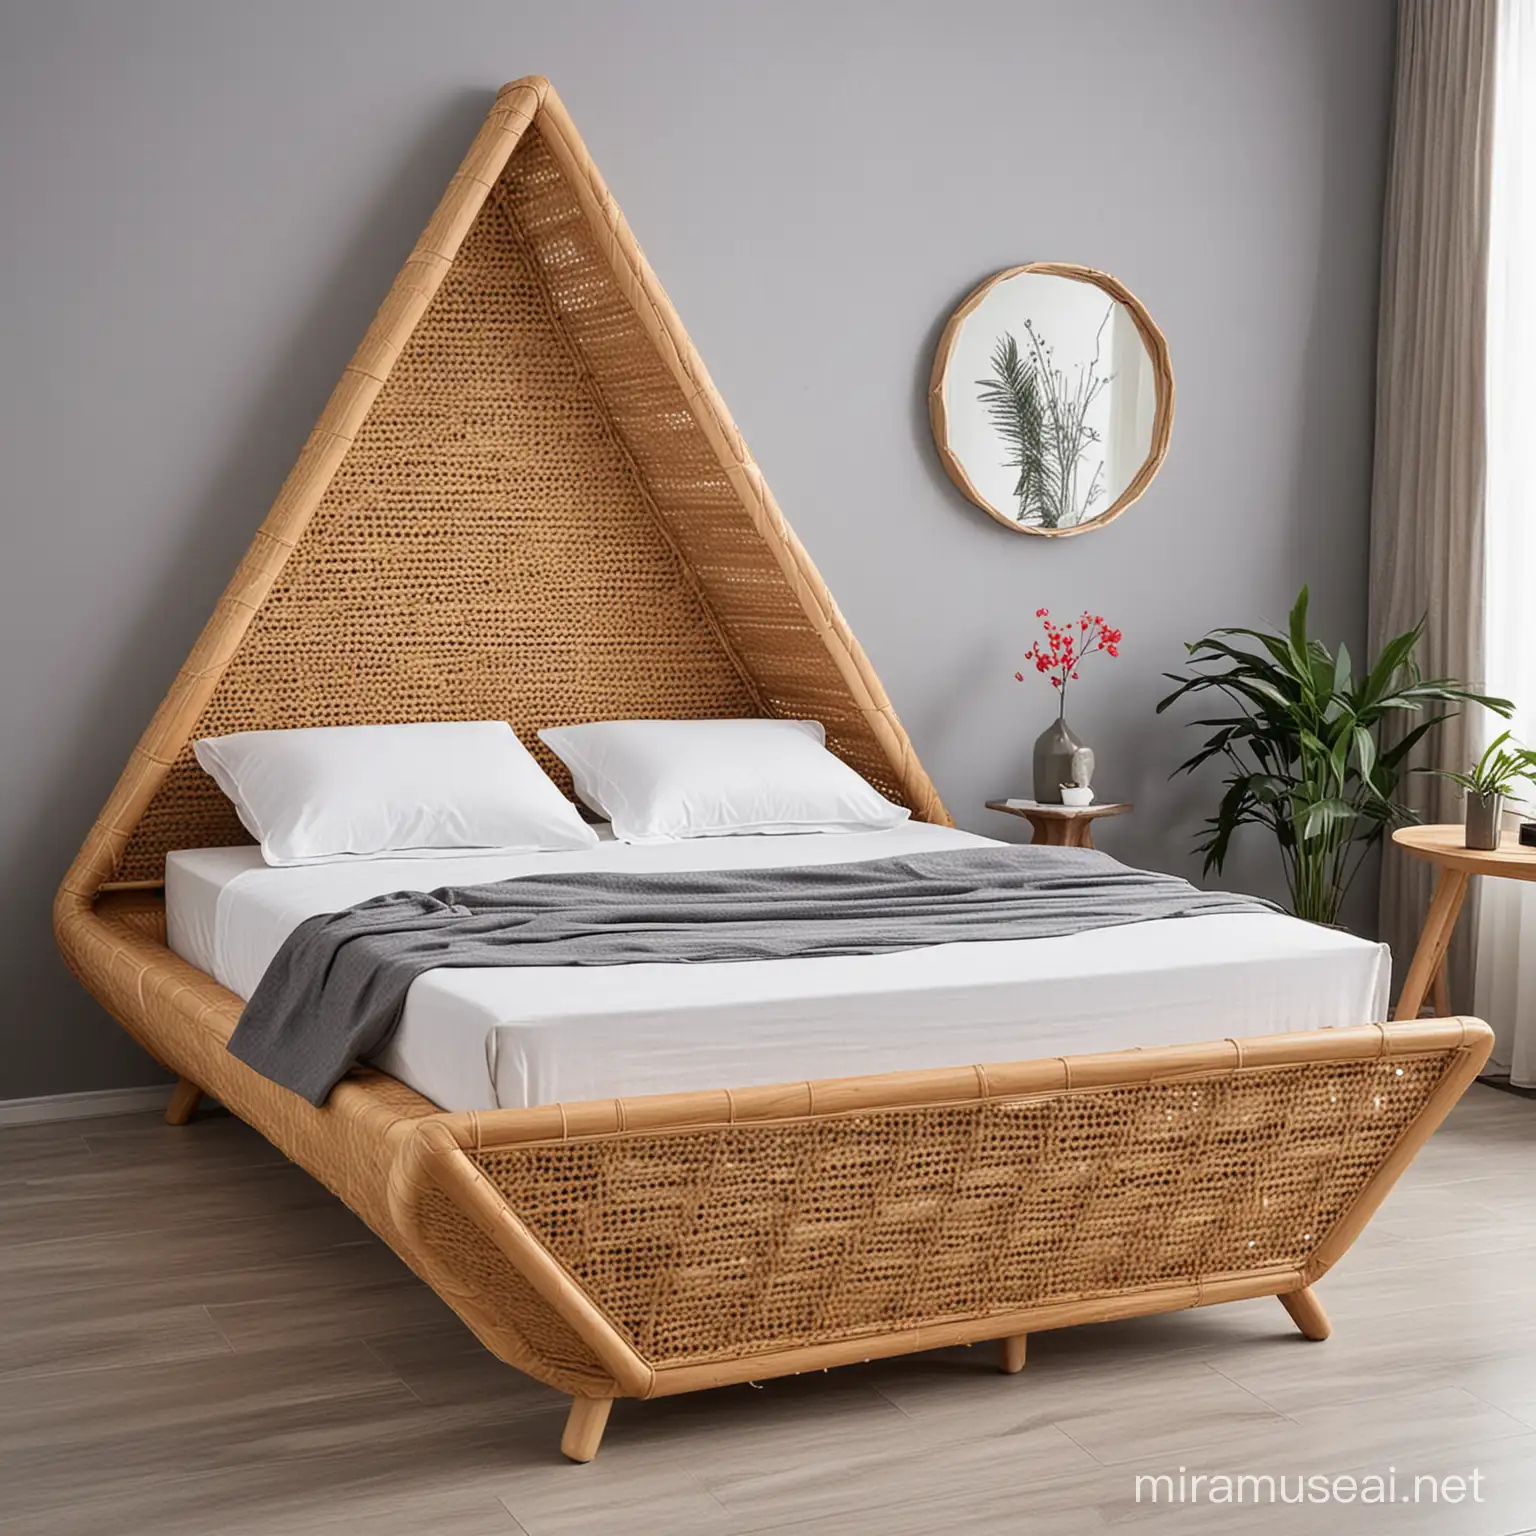 unique and modern single bed with rattan and wood material triangle
 shape